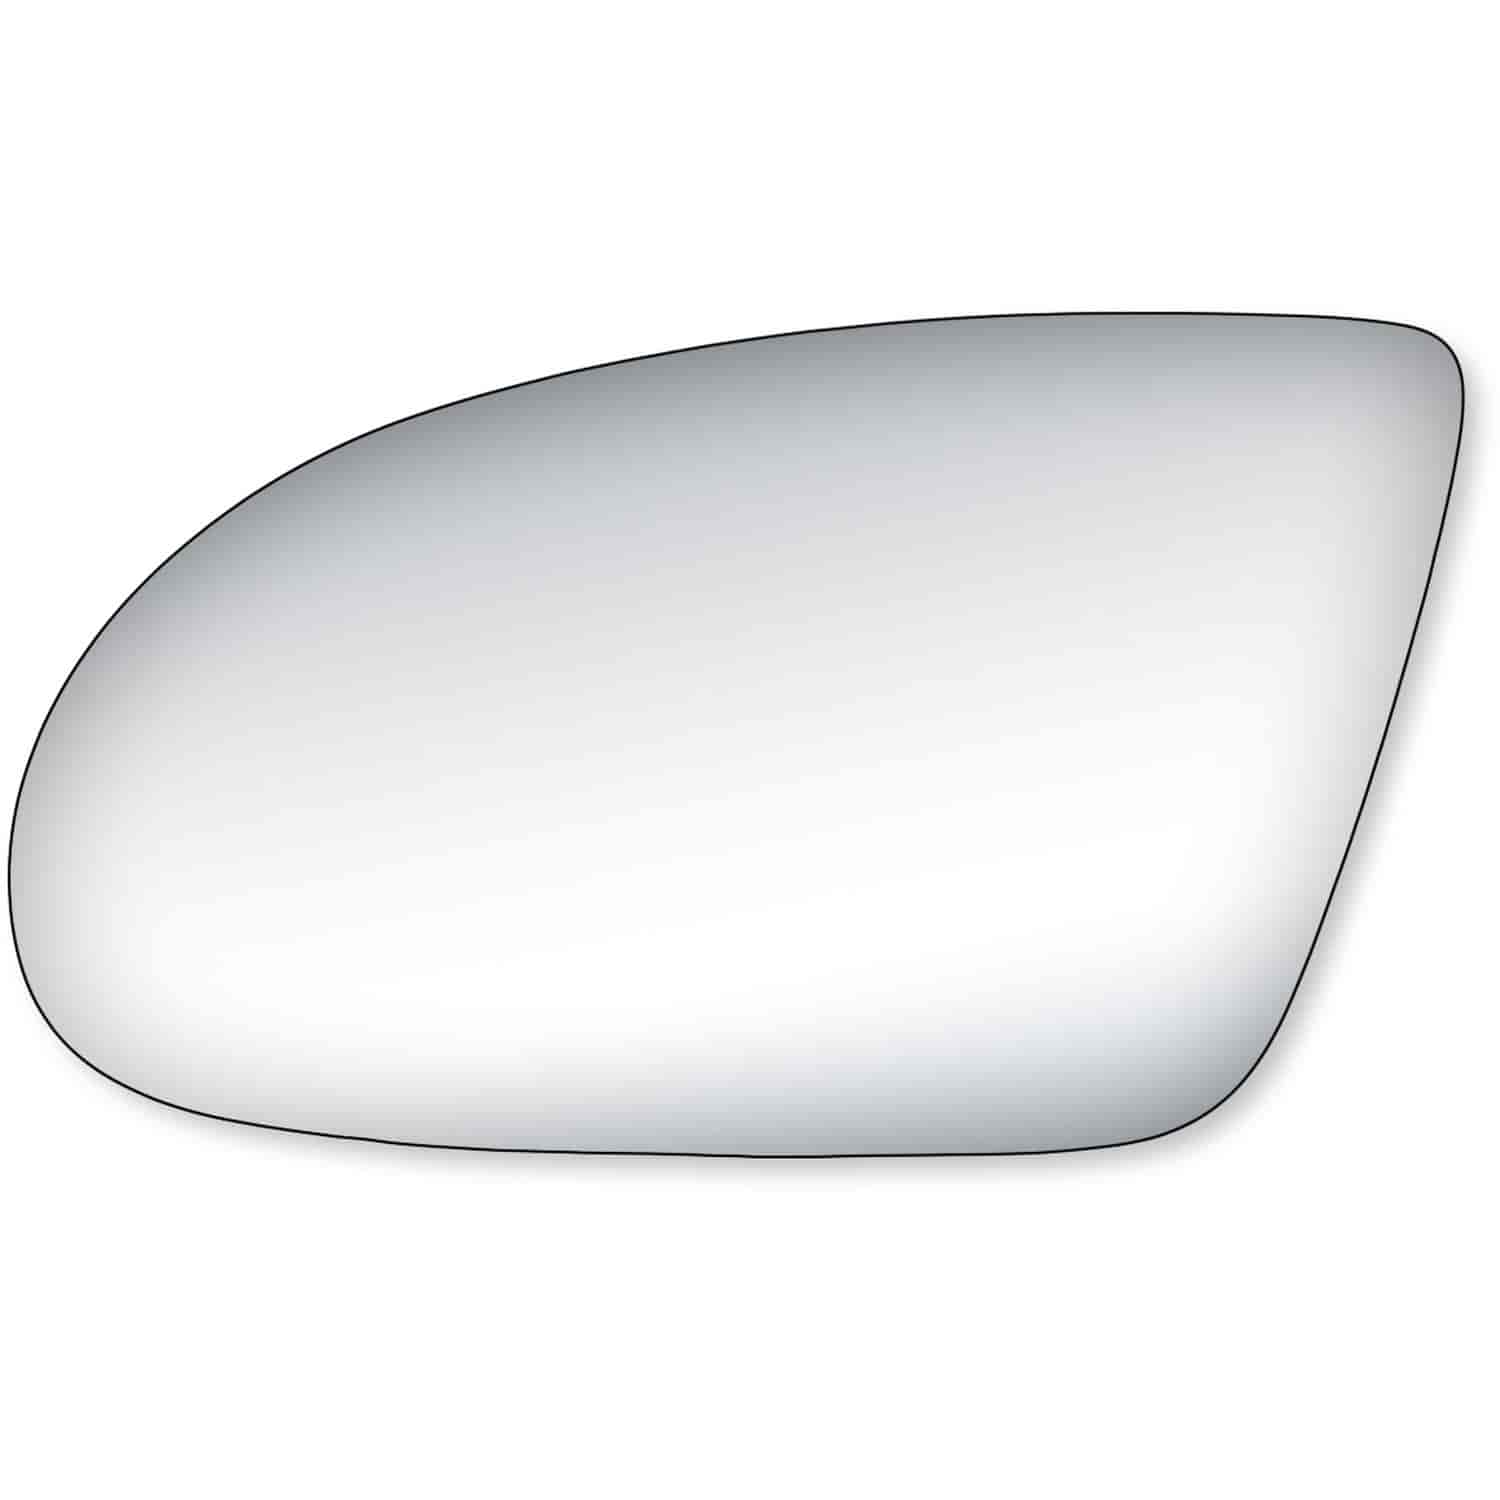 Replacement Glass for 93-02 Camaro; 93-02 Firebird the